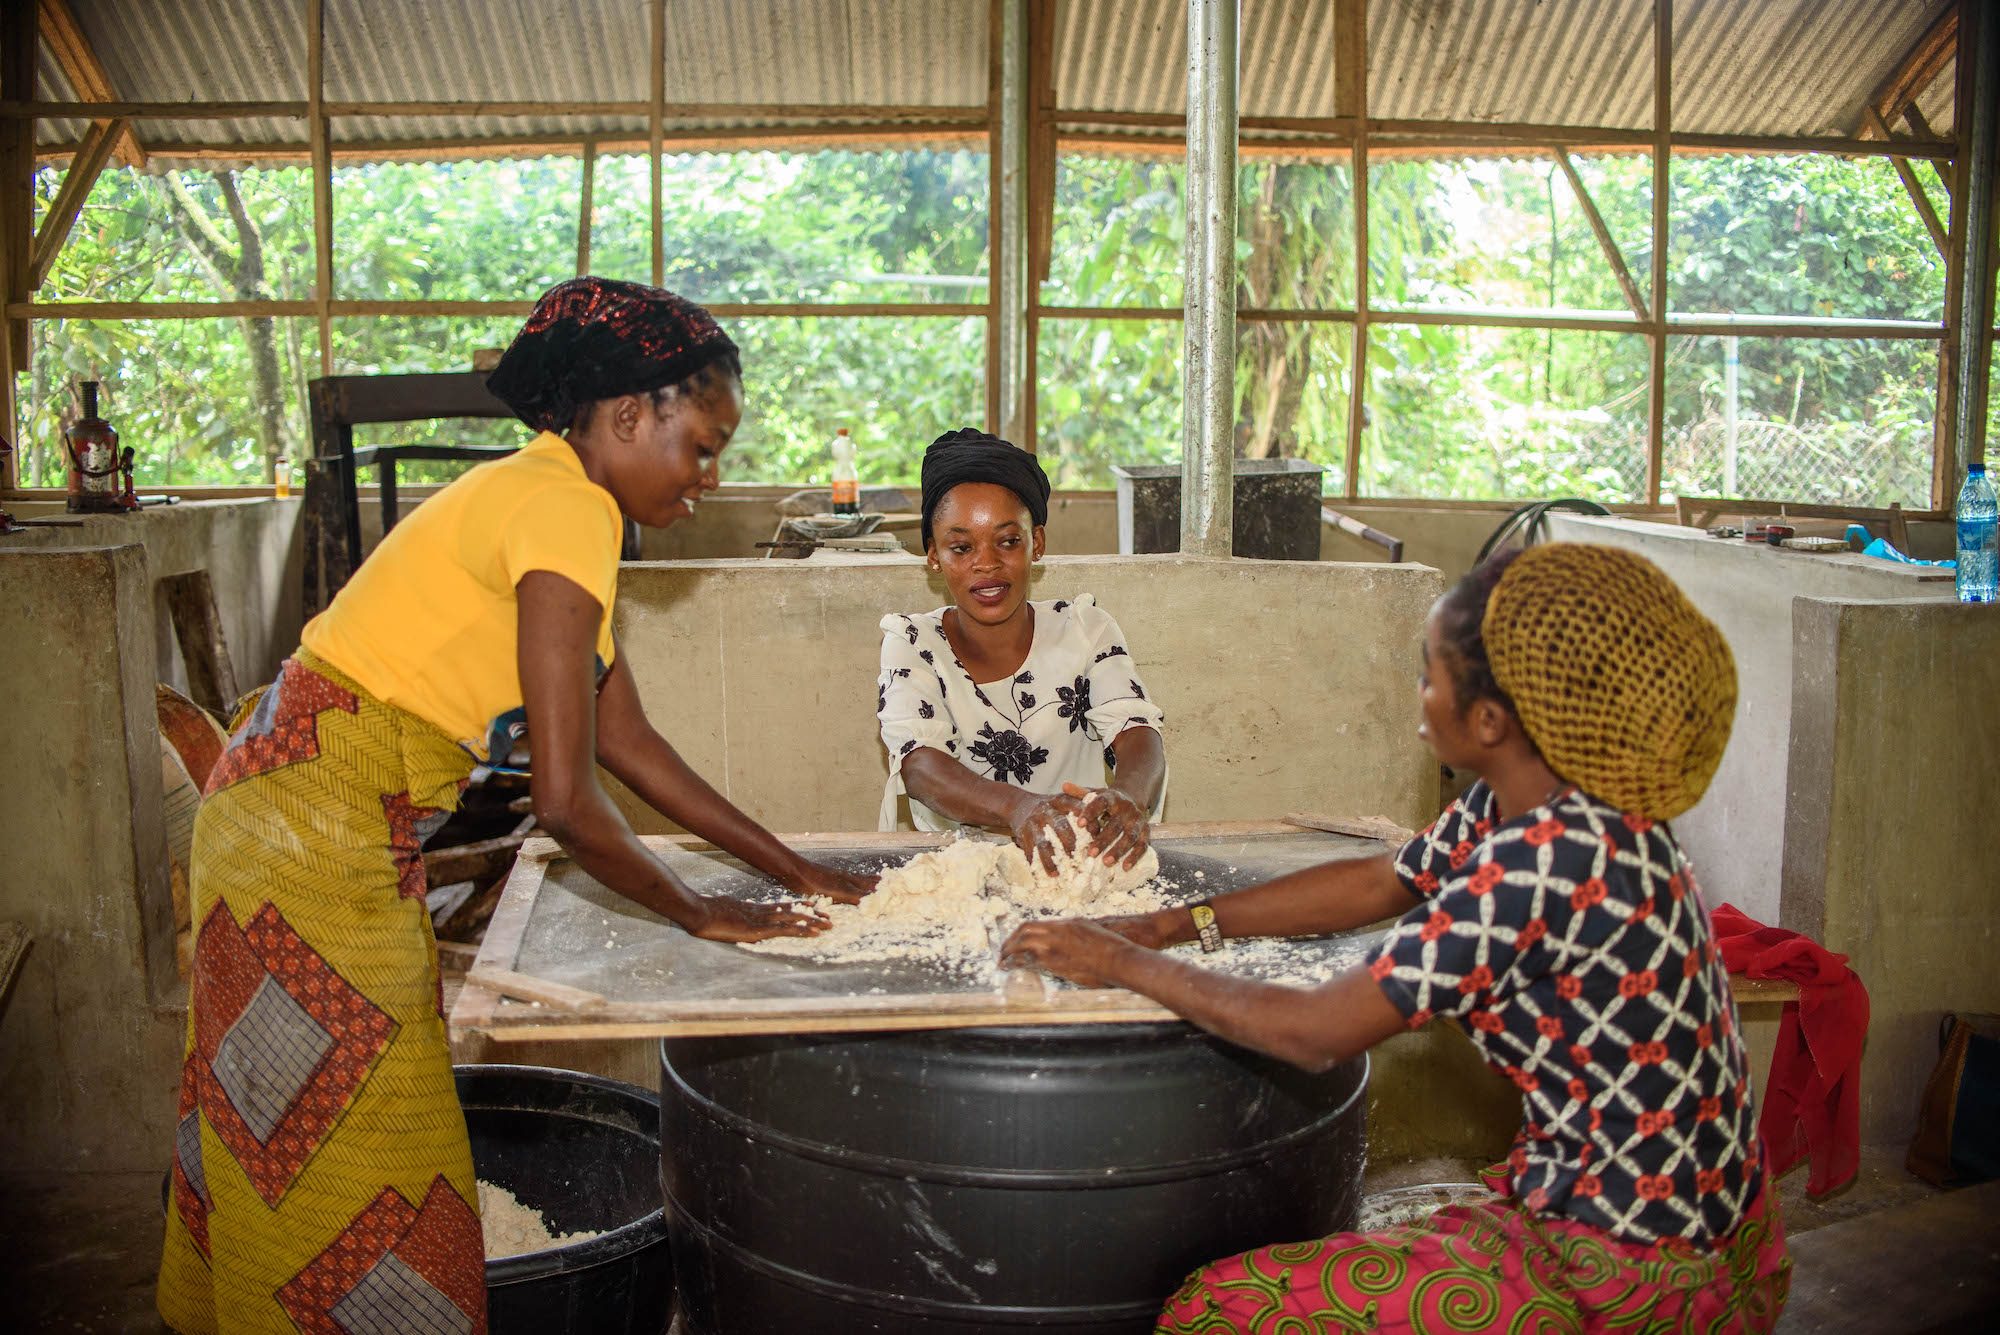 three women working with cassava plant in front of a window